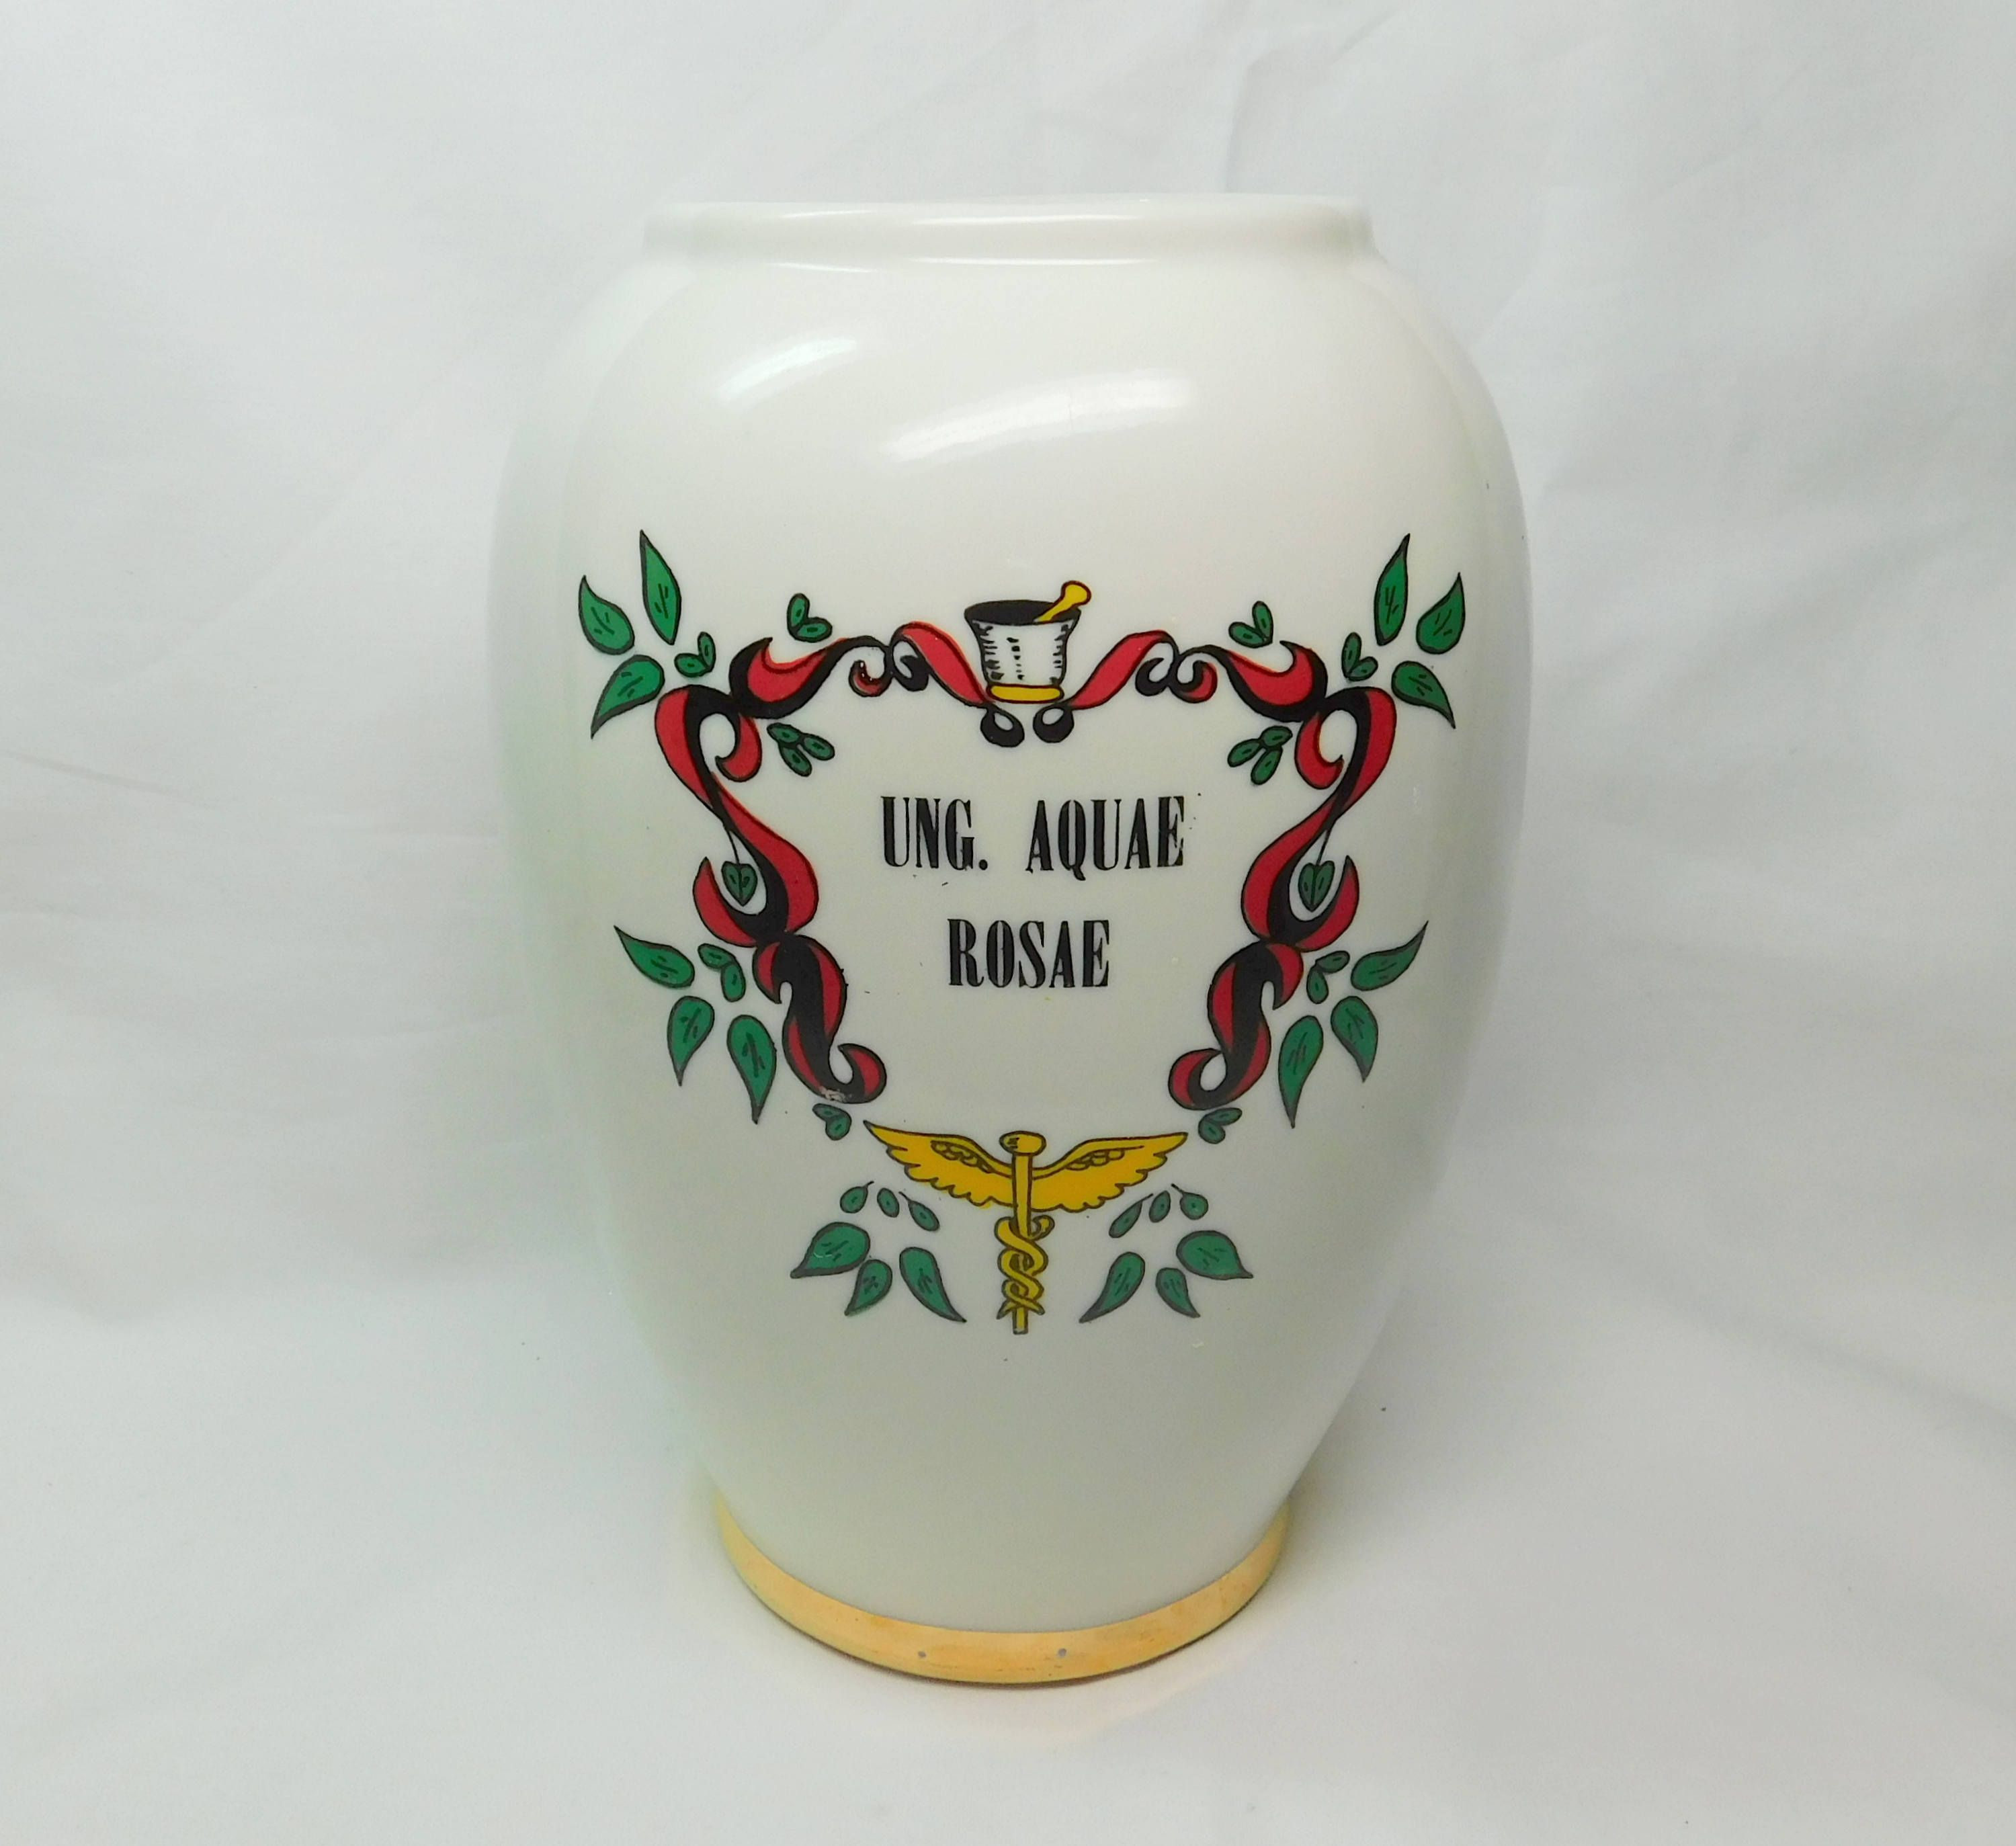 14 Popular Antique Porcelain Vases 2024 free download antique porcelain vases of 43 lenox vase with gold trim the weekly world in vintage fashioned by blair apothecary porcelain vase latin ung